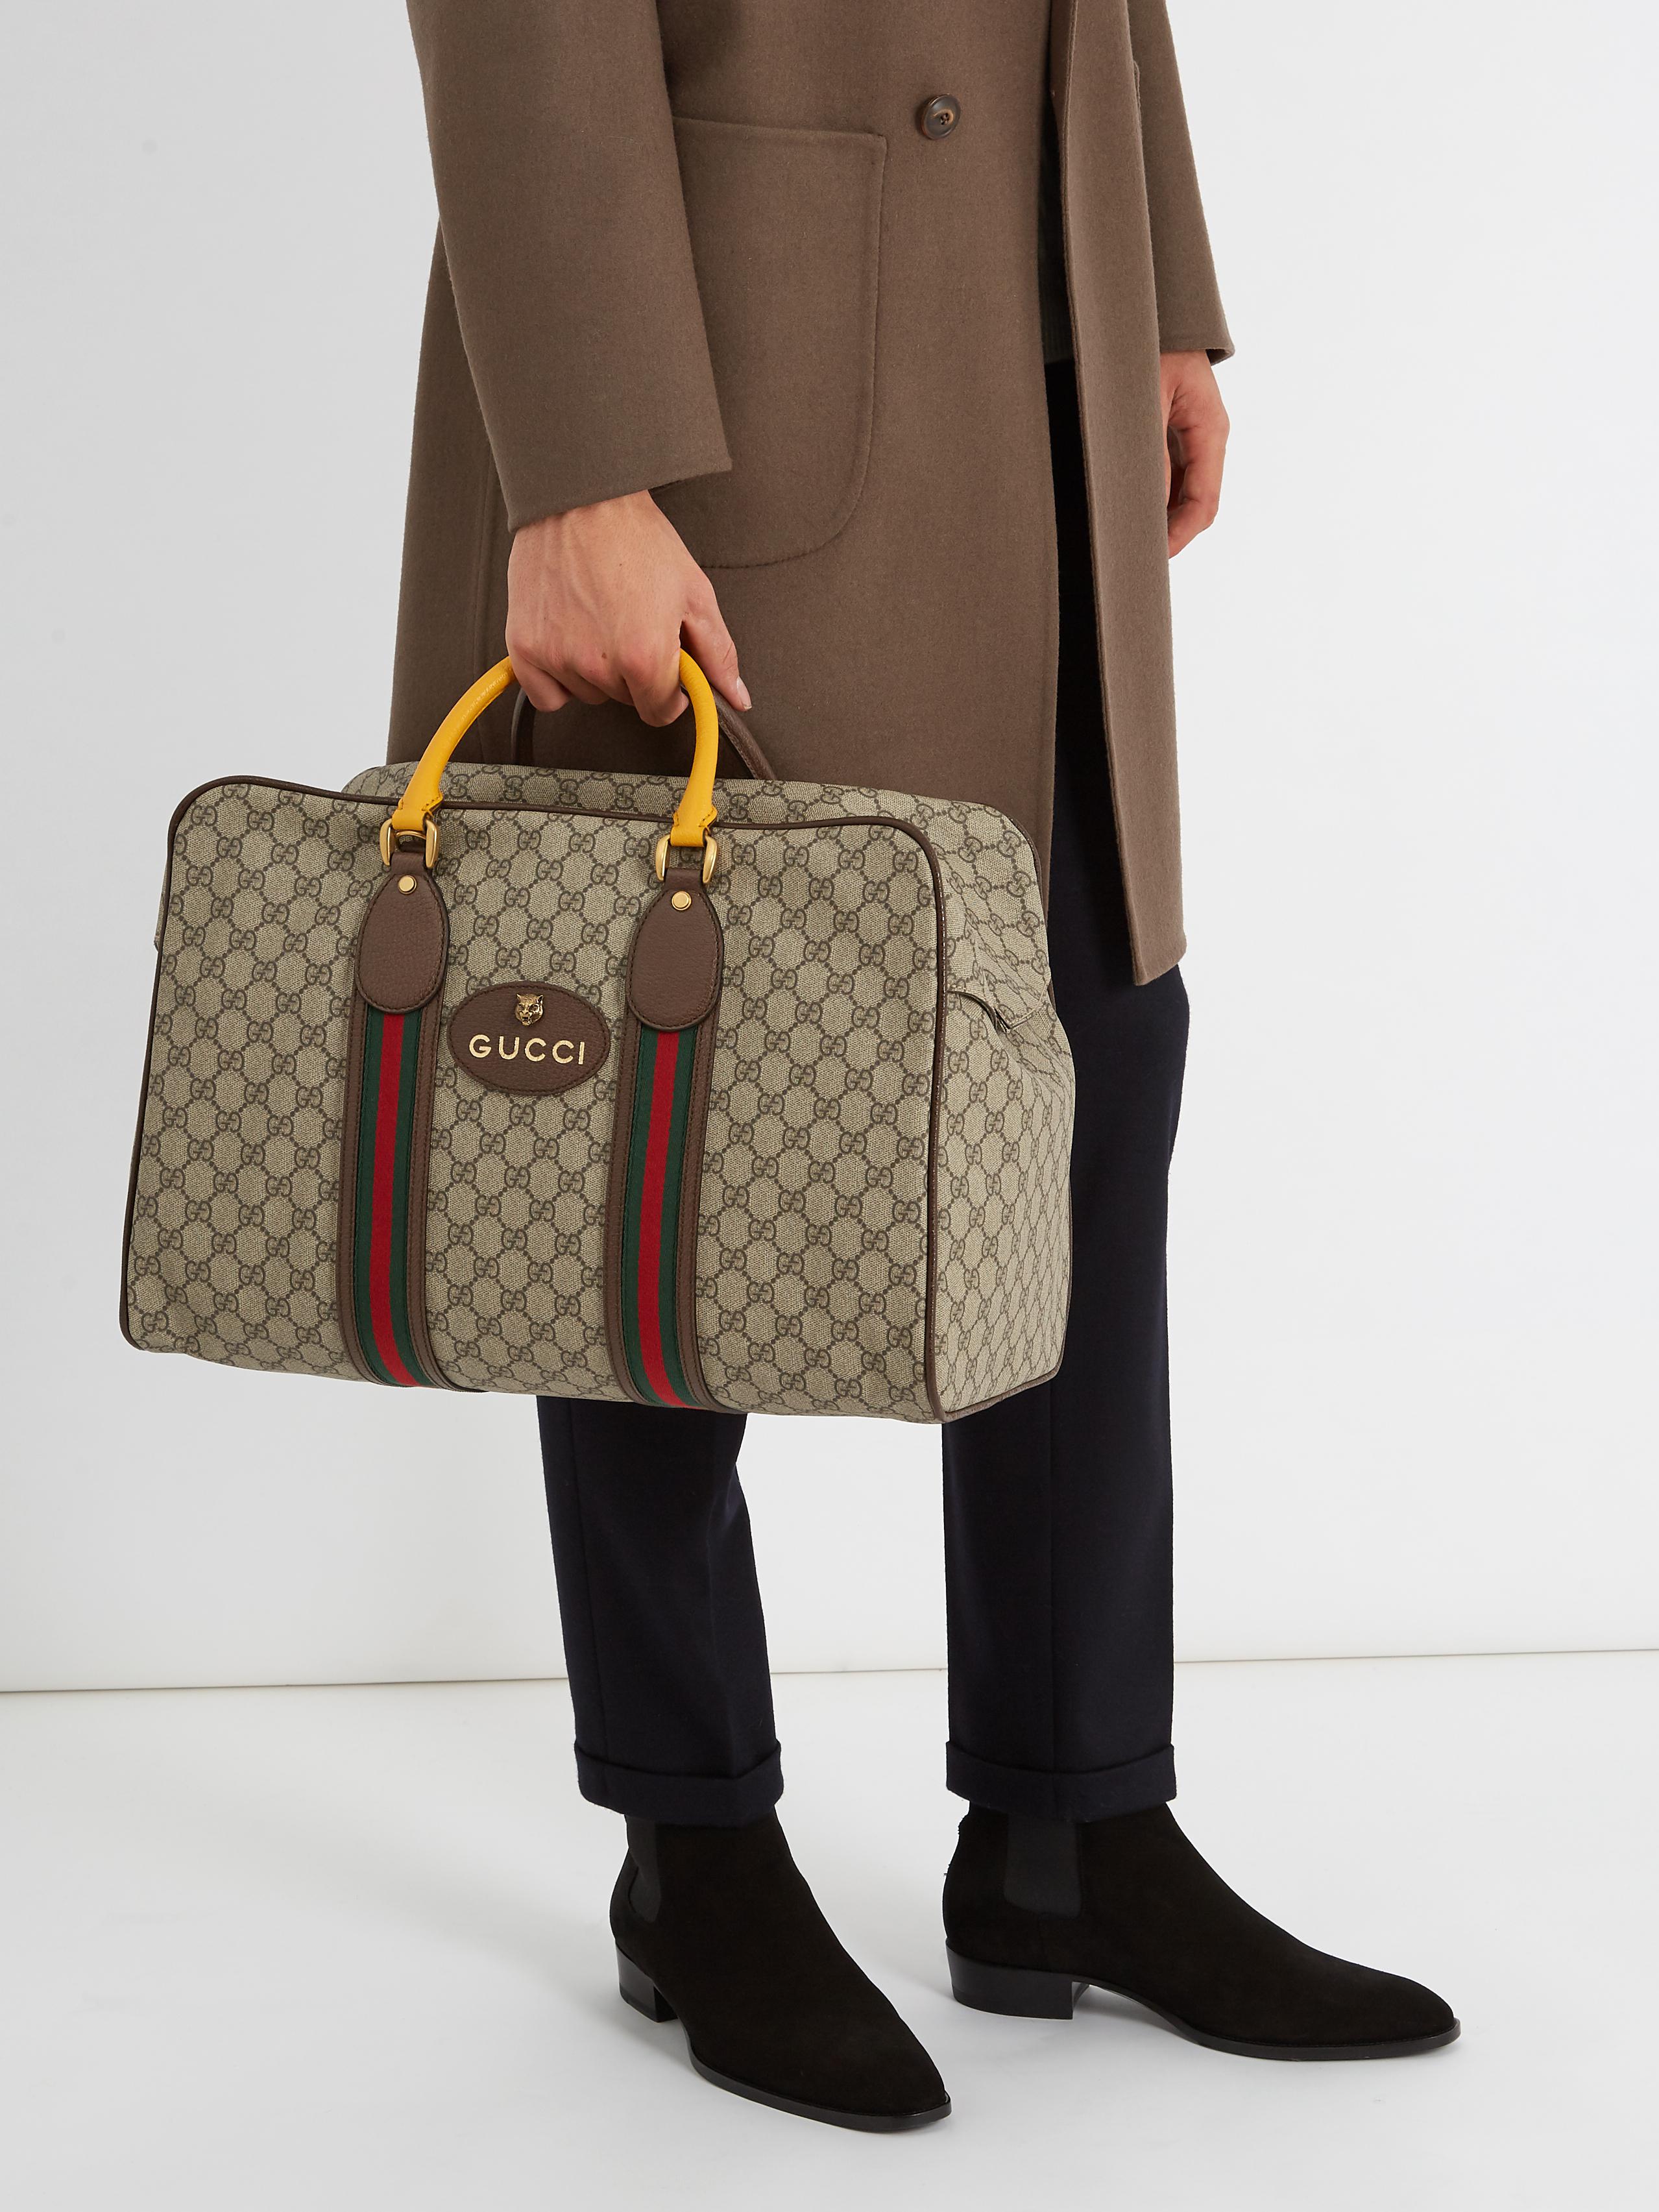 Gucci Gg Supreme Canvas And Leather Holdall in Brown for Men - Lyst